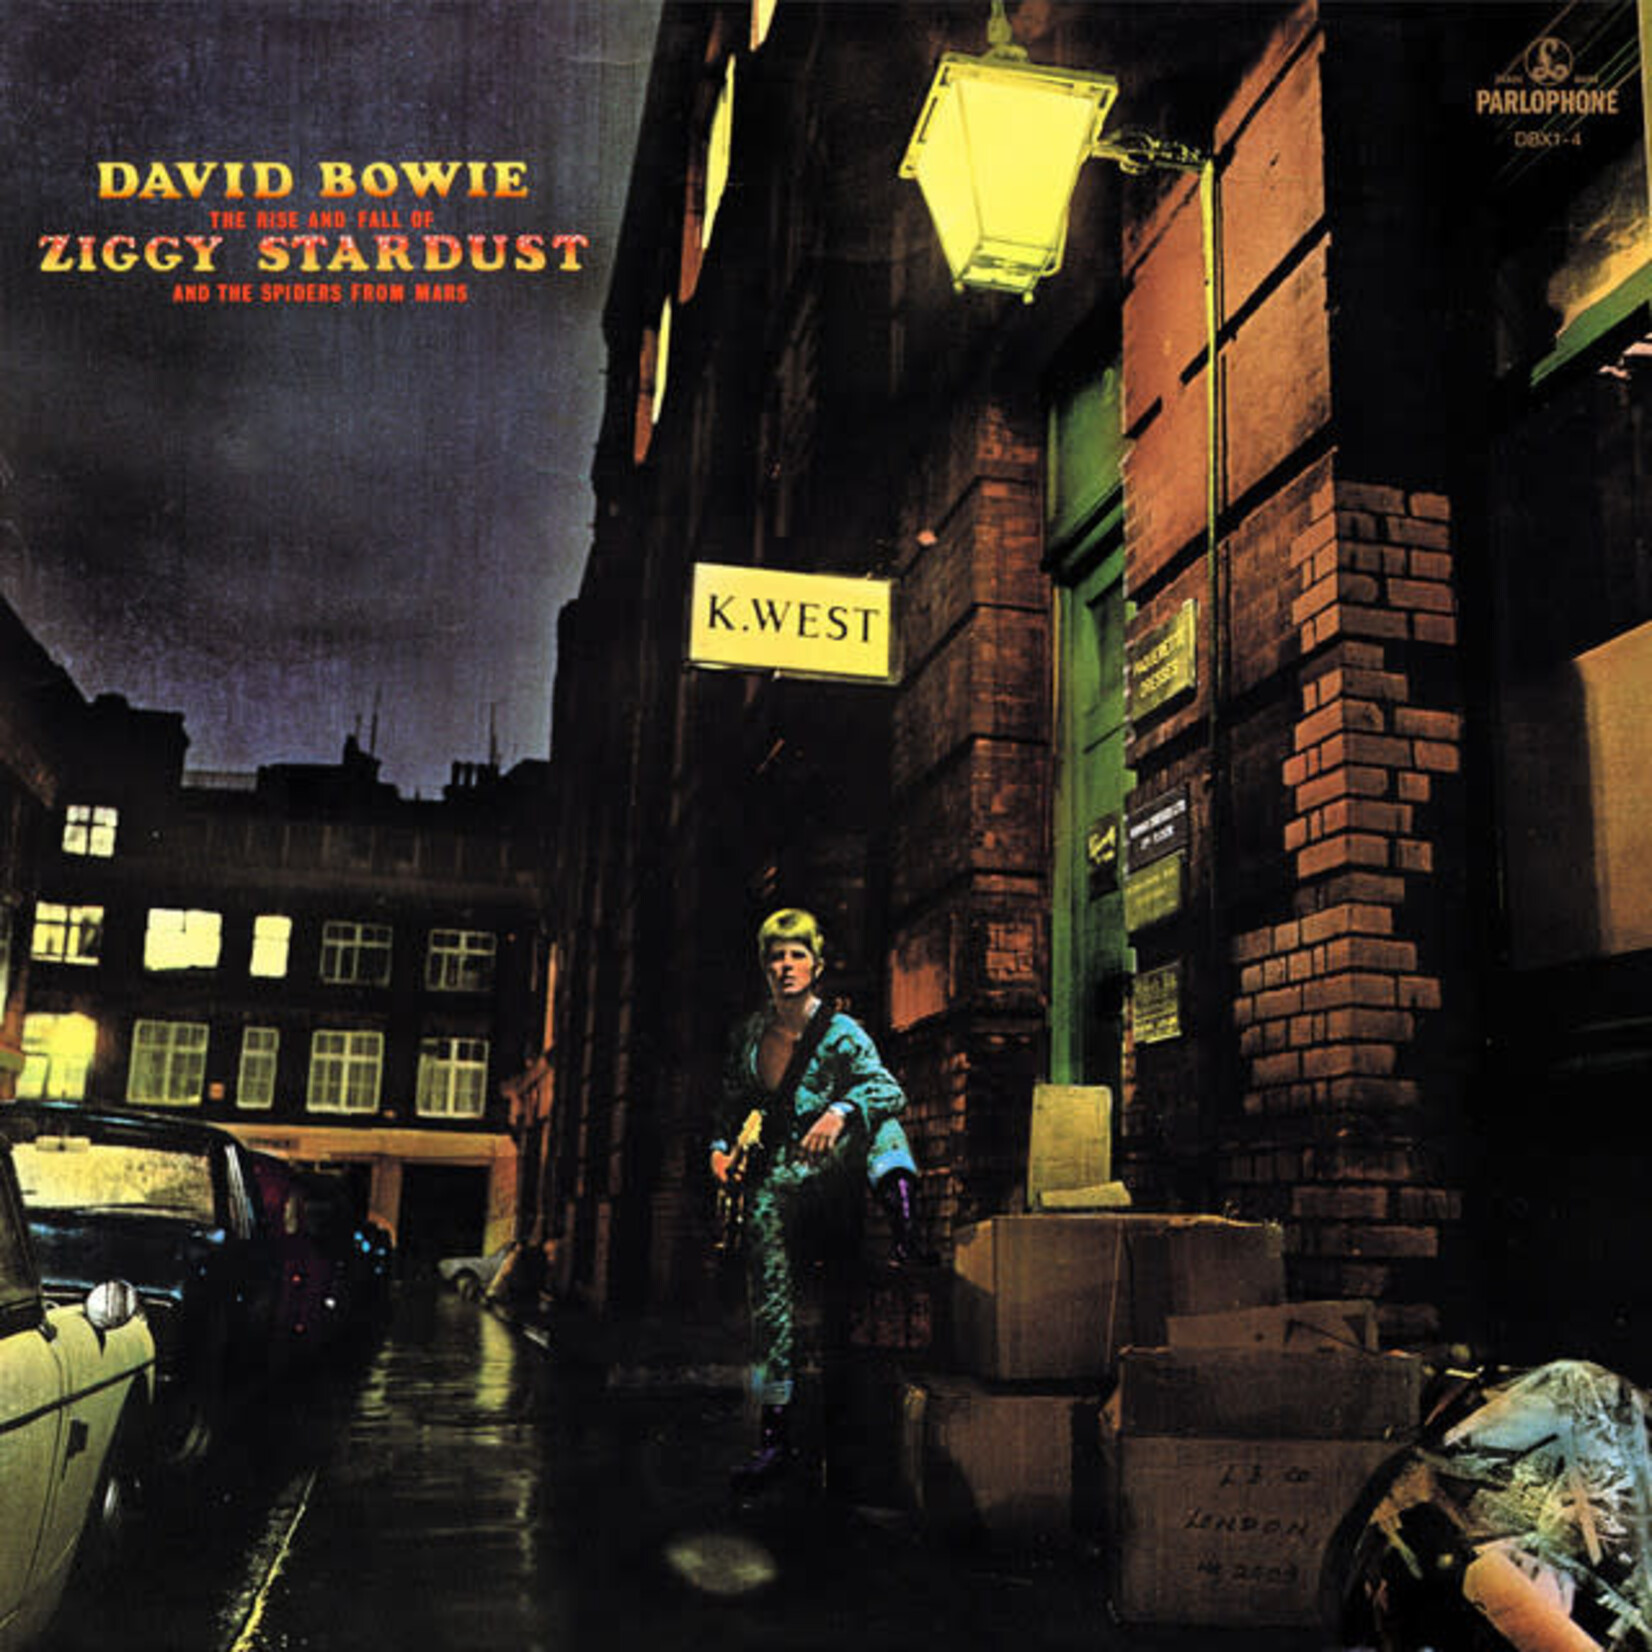 David Bowie - The Rise And Fall Of Ziggy Stardust And The Spiders From Mars [CD]